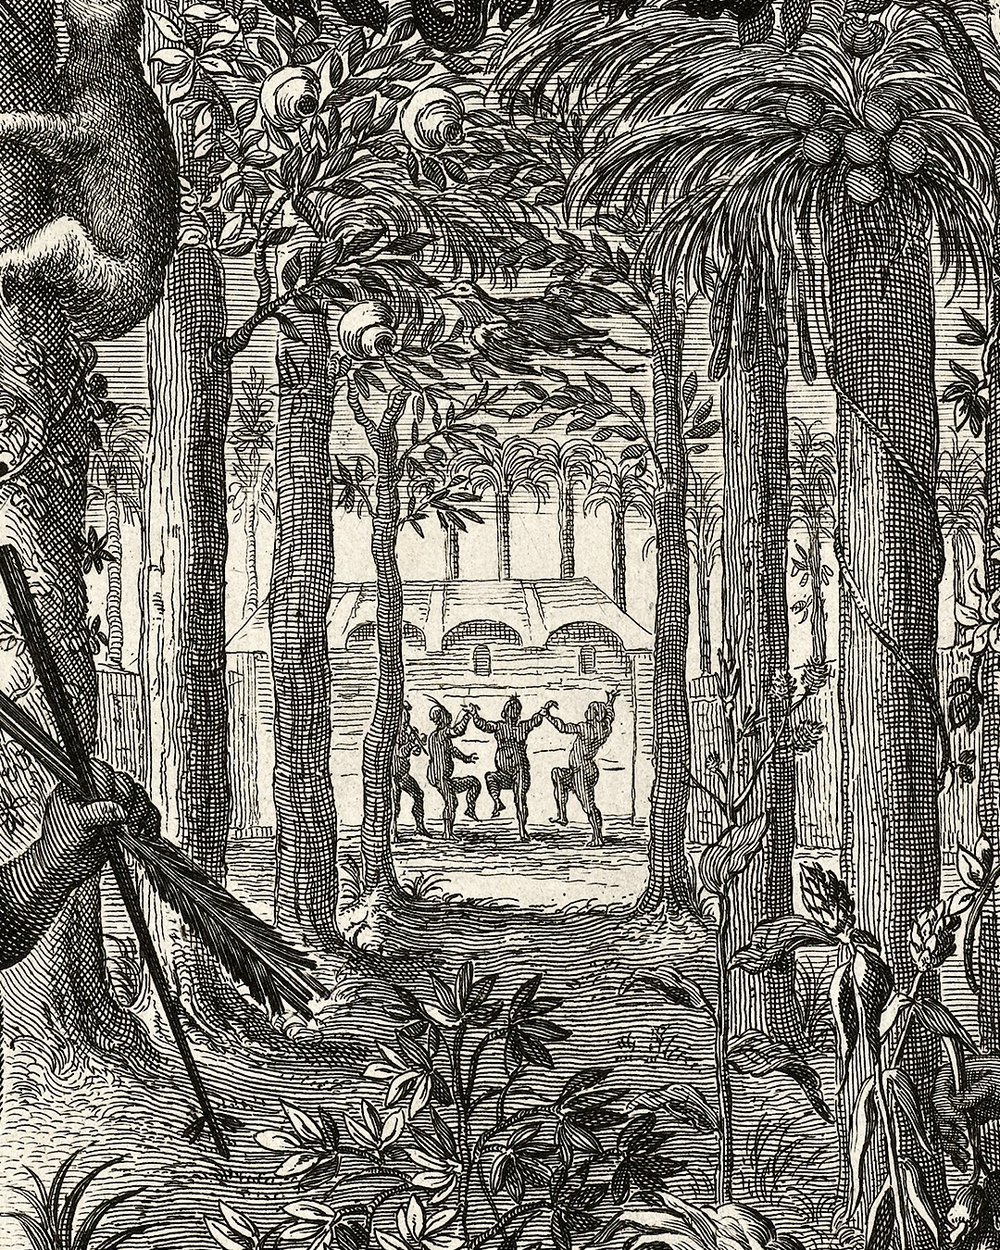 "Brazilians in a forest" (1648)